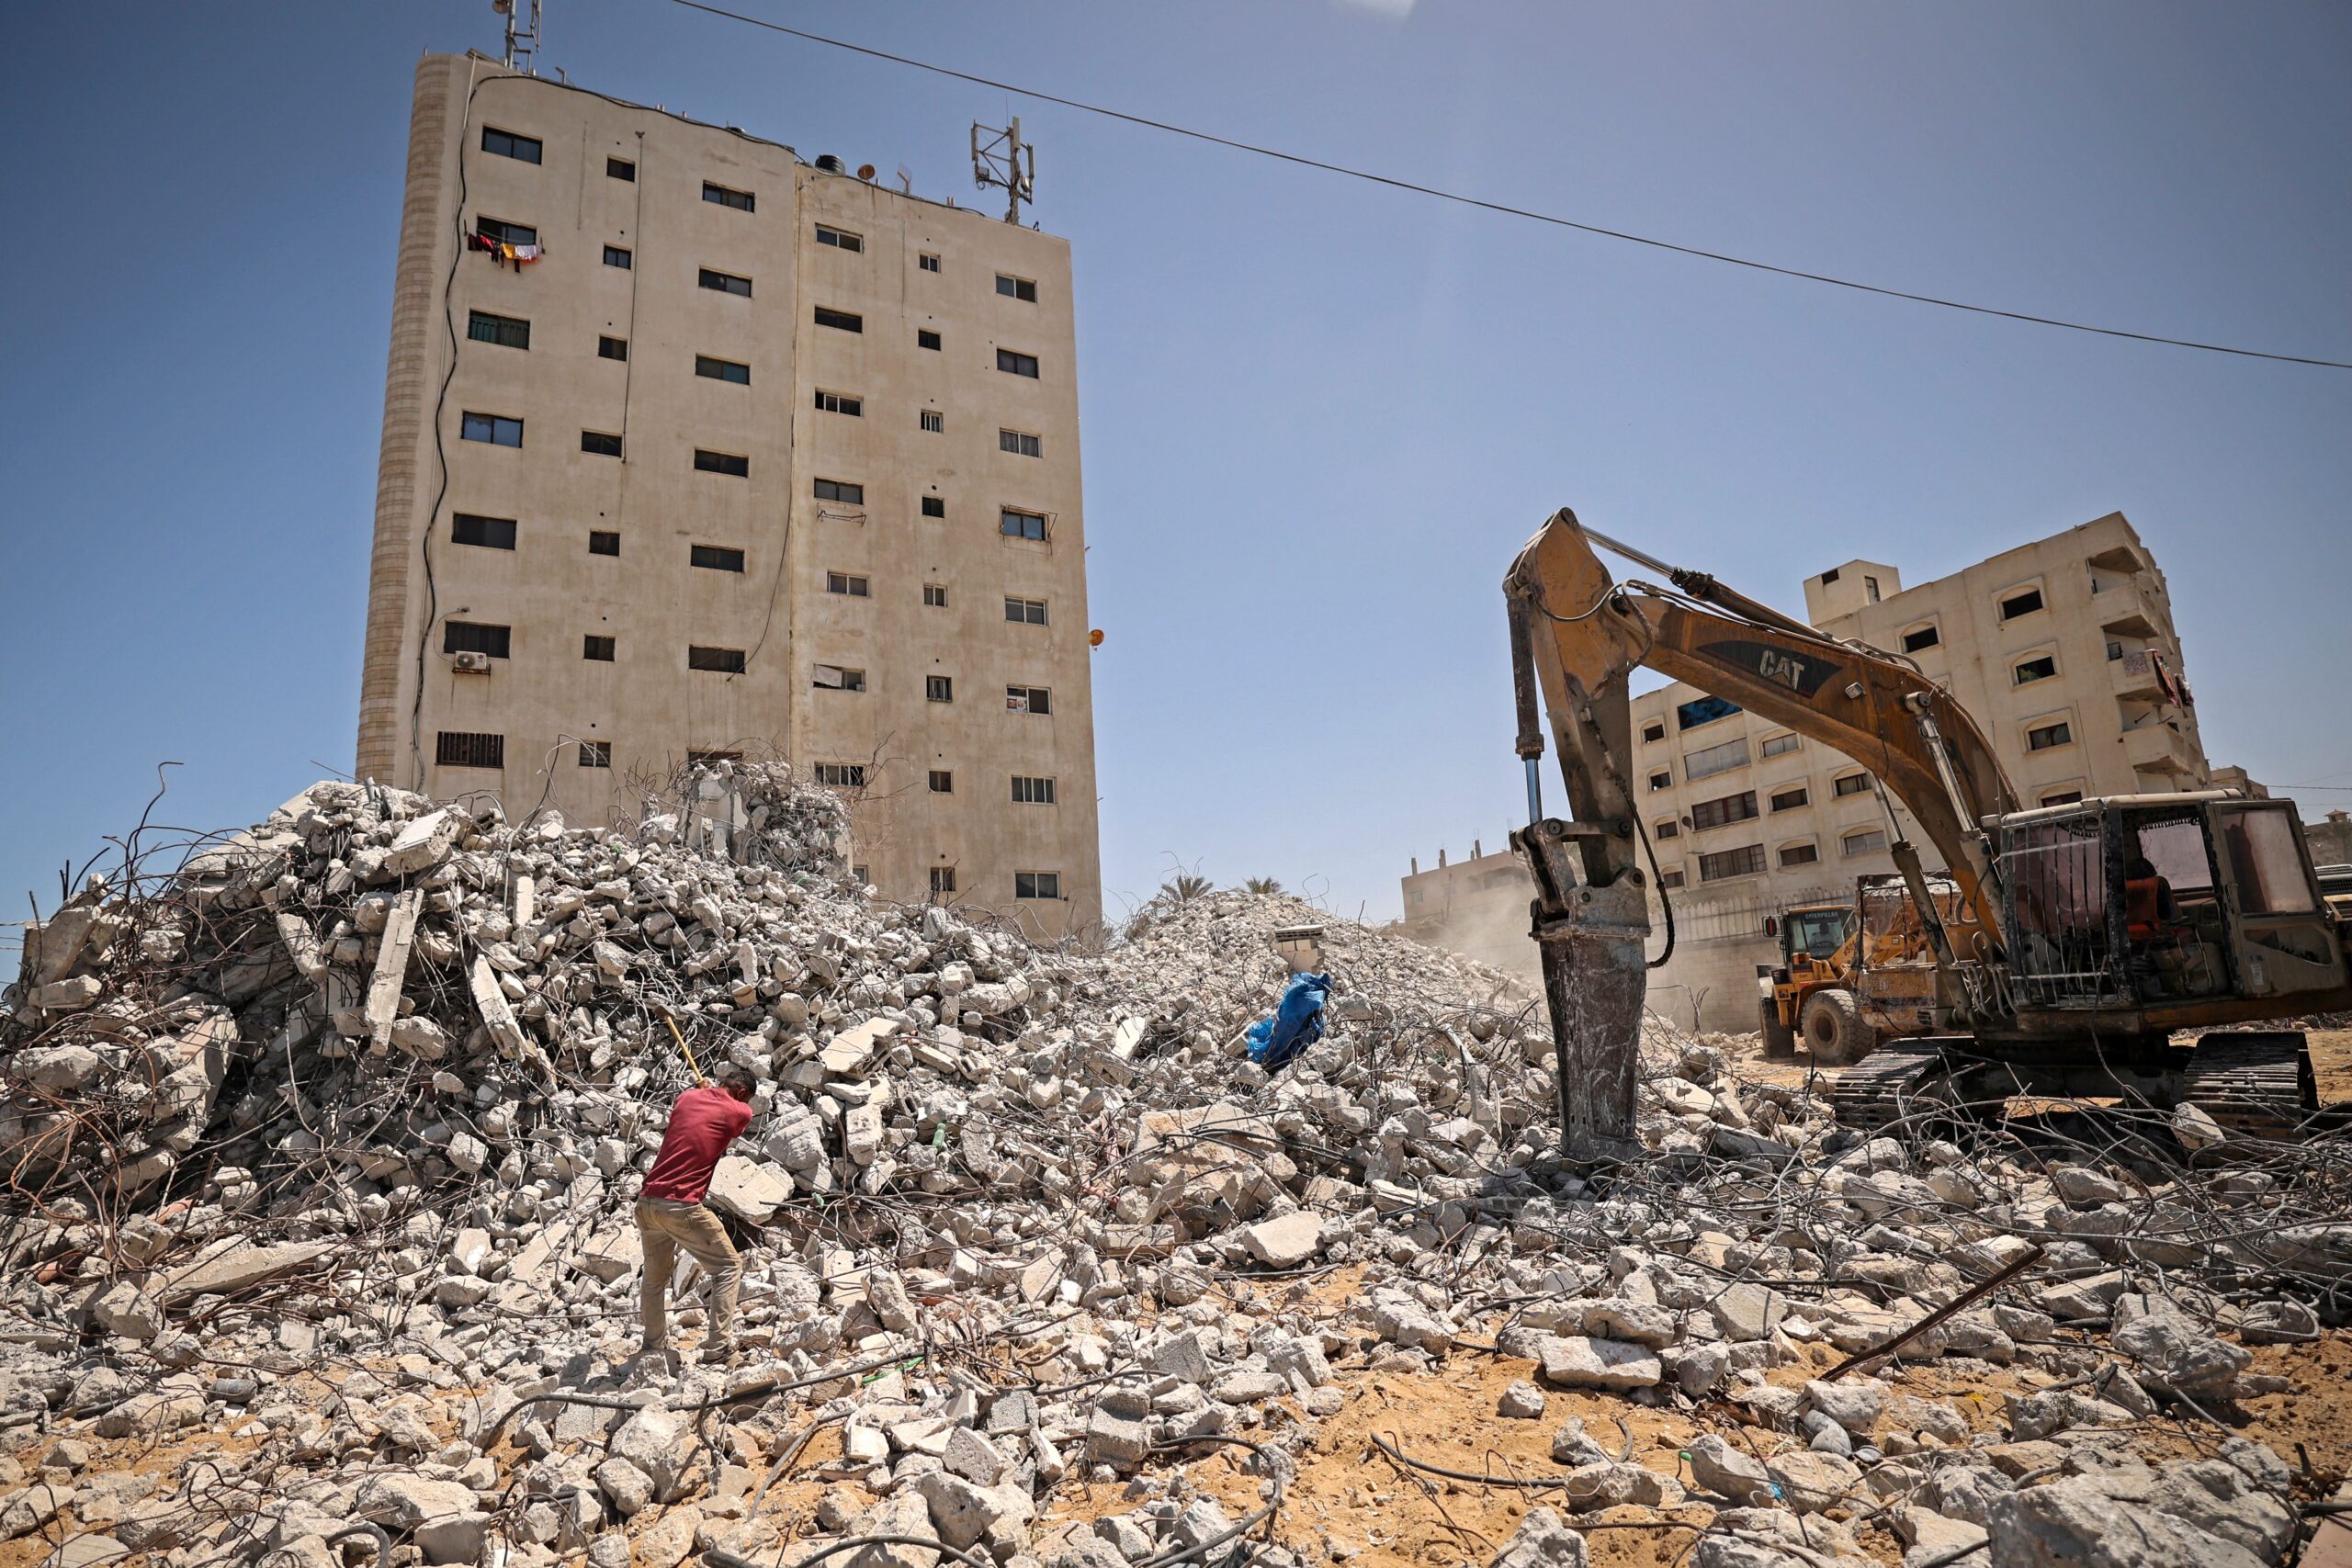 A Palestinian worker clears the rubble of a destroyed building on the first anniversary of the May 2021 conflict between Israel and Hamas, in Gaza City on May 10, 2022 [Photo by MAHMUD HAMS/AFP via Getty Images]